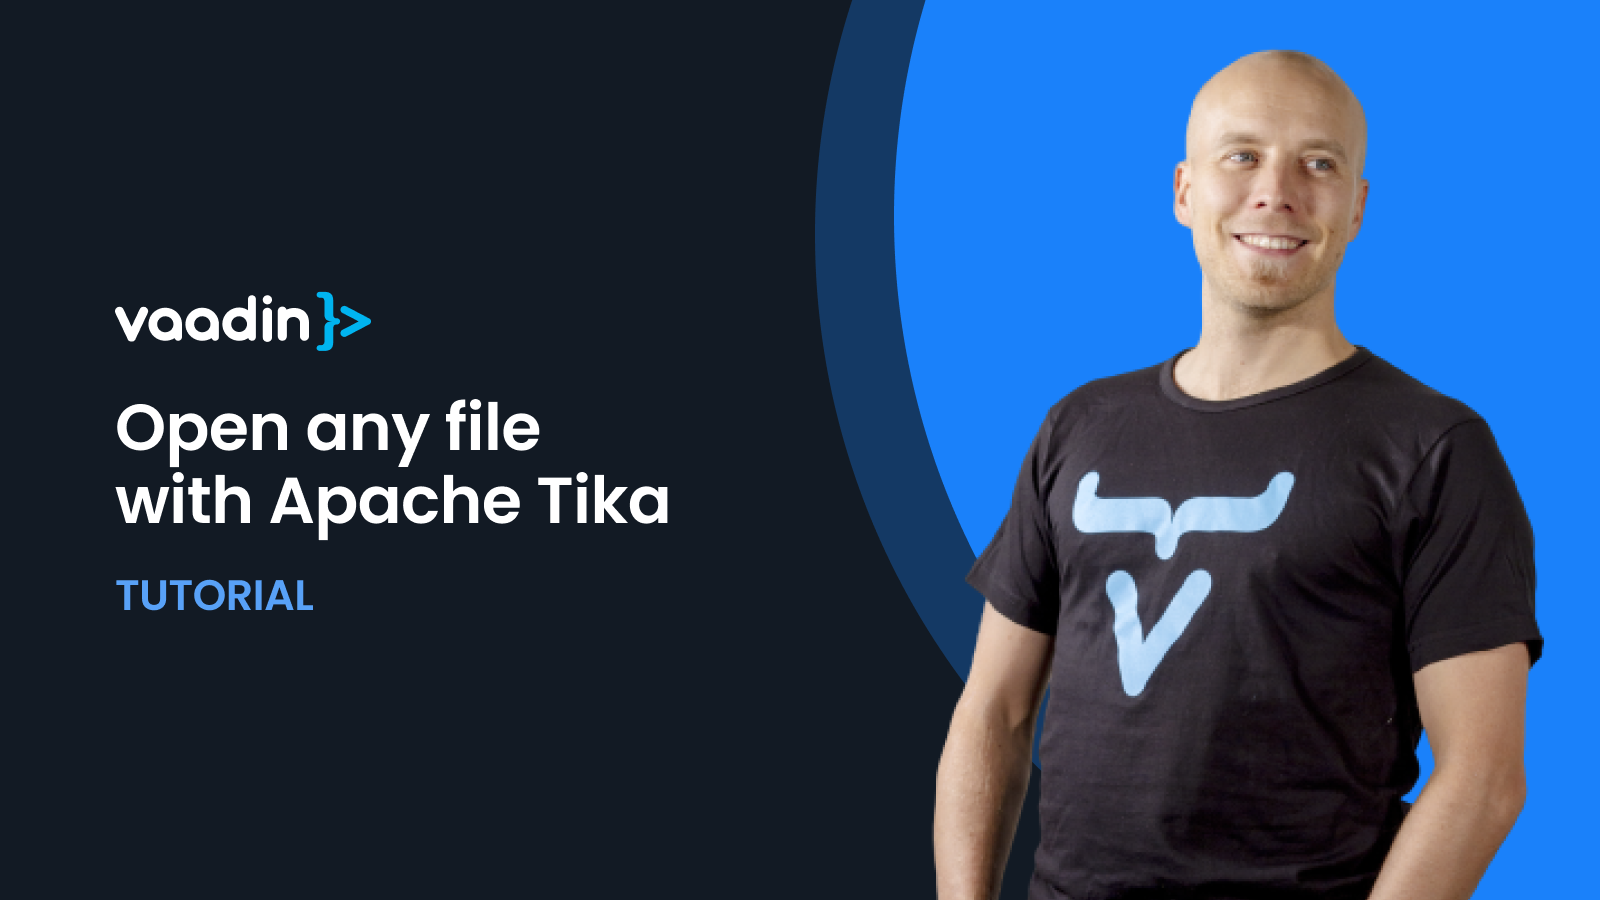 Learn how to open any file with Apache Tika.